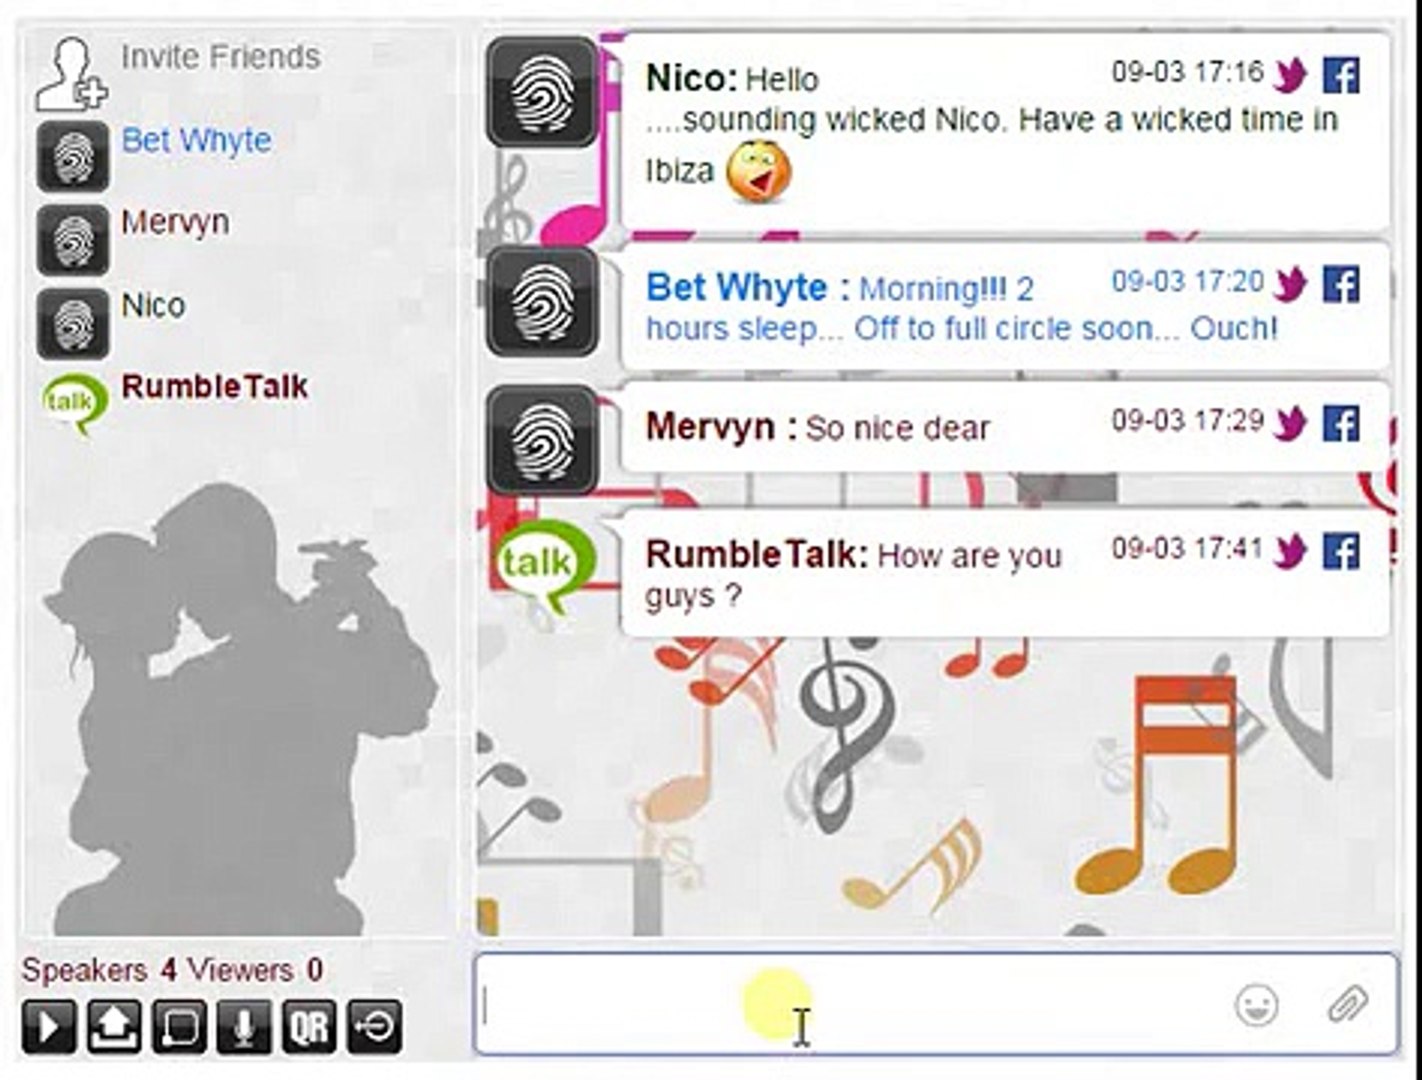 Live Music Chat Room for website - attach images, youtube videos and talk in live video chat